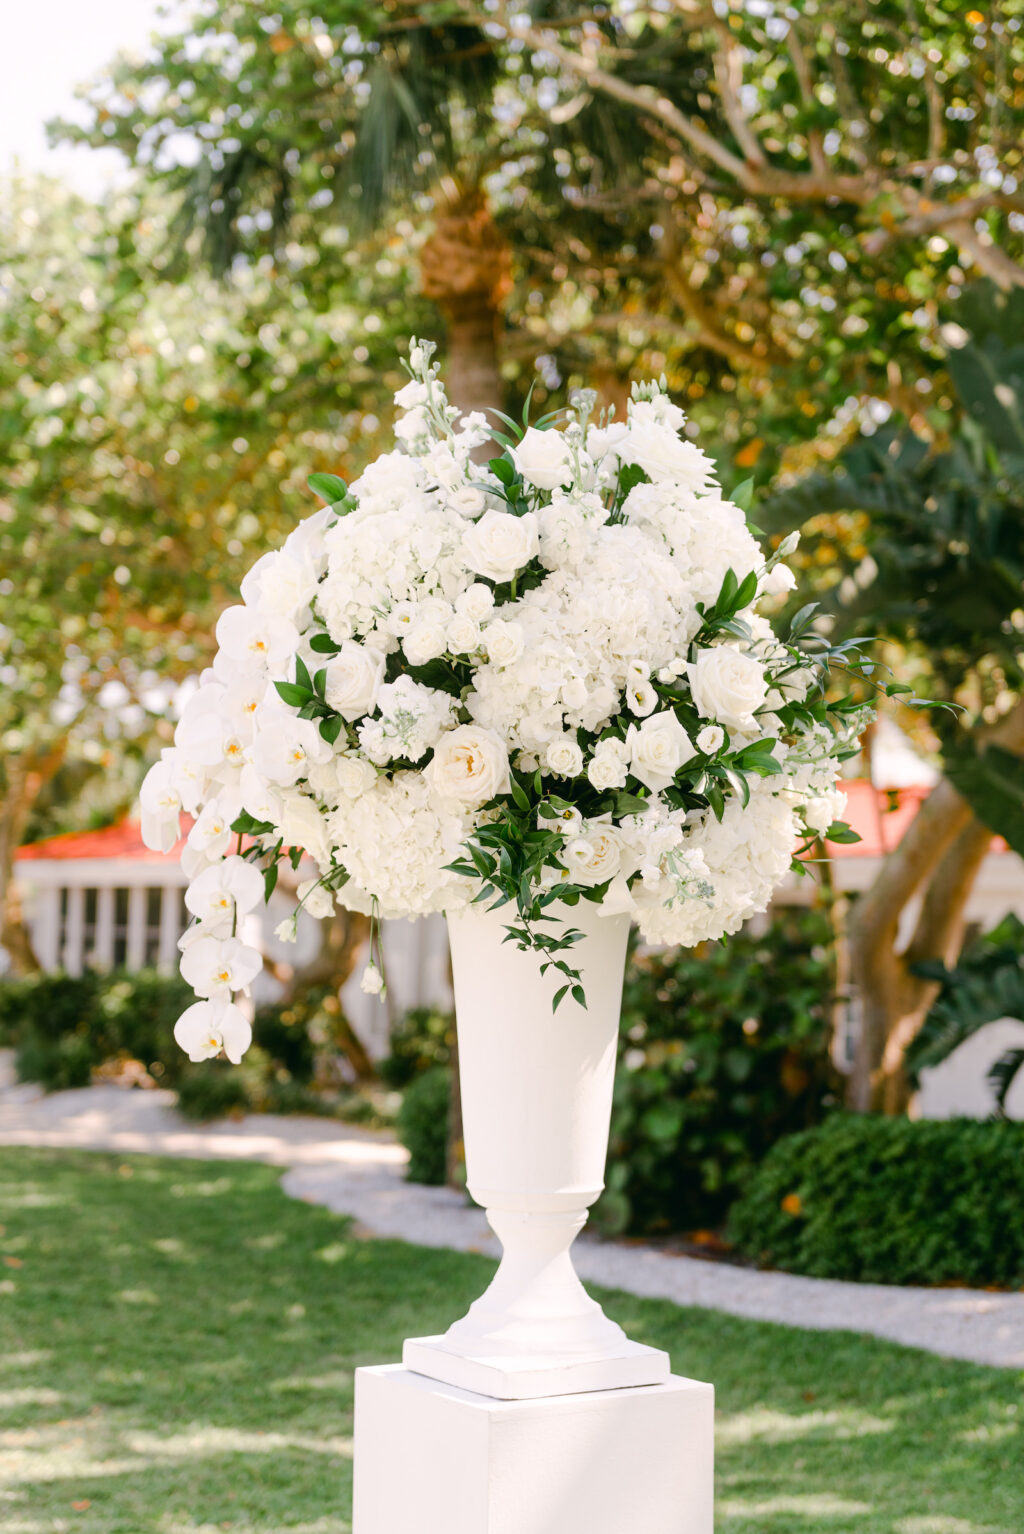 Classic Tampa Bay Outdoor Wedding Ceremony, Tropical Country Club with Umbrella's for Shade, White Floral Arrangements | Carlouel Yacht Club | Florida Wedding Planner Parties A La Carte | Clearwater Florist Bruce Wayne Florals